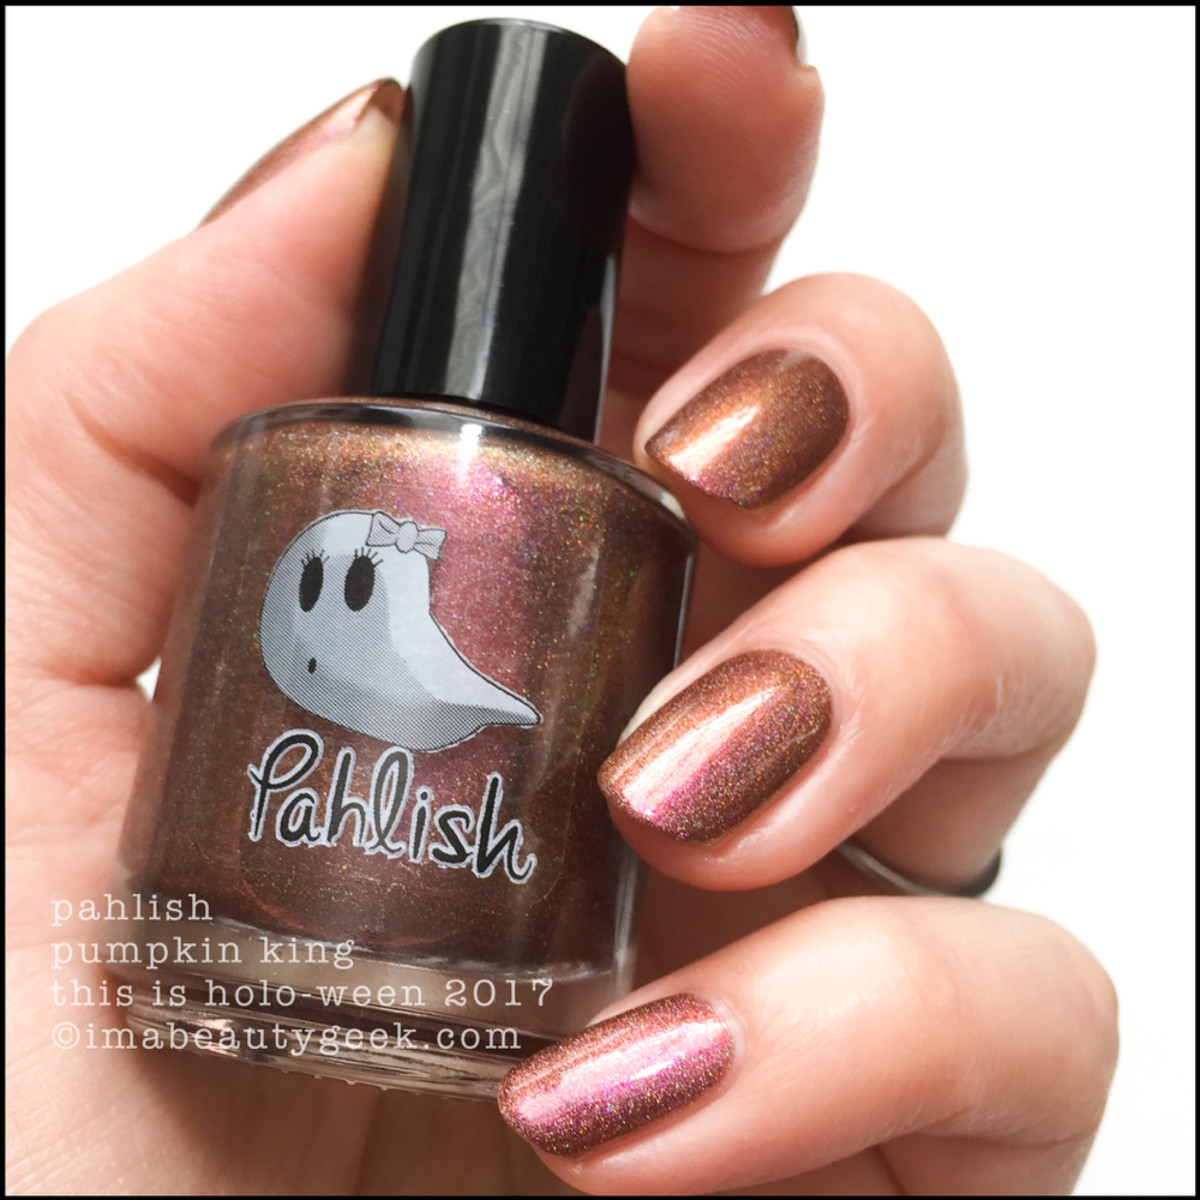 Pahlish Pumpkin King - This is Holo-ween! 2017